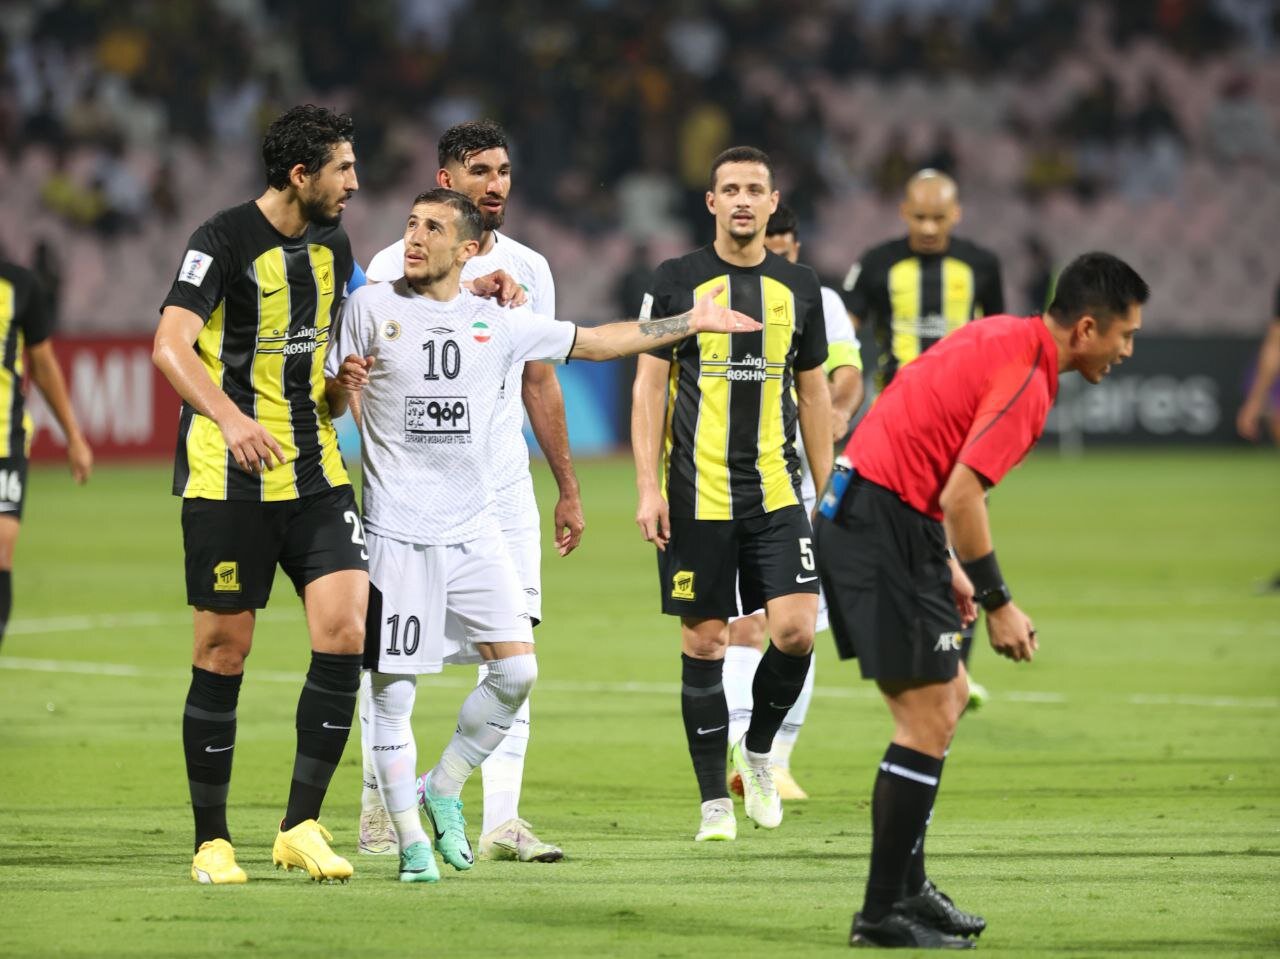 AFC Champions League: Al Ittihad overtake Sepahan to qualify for